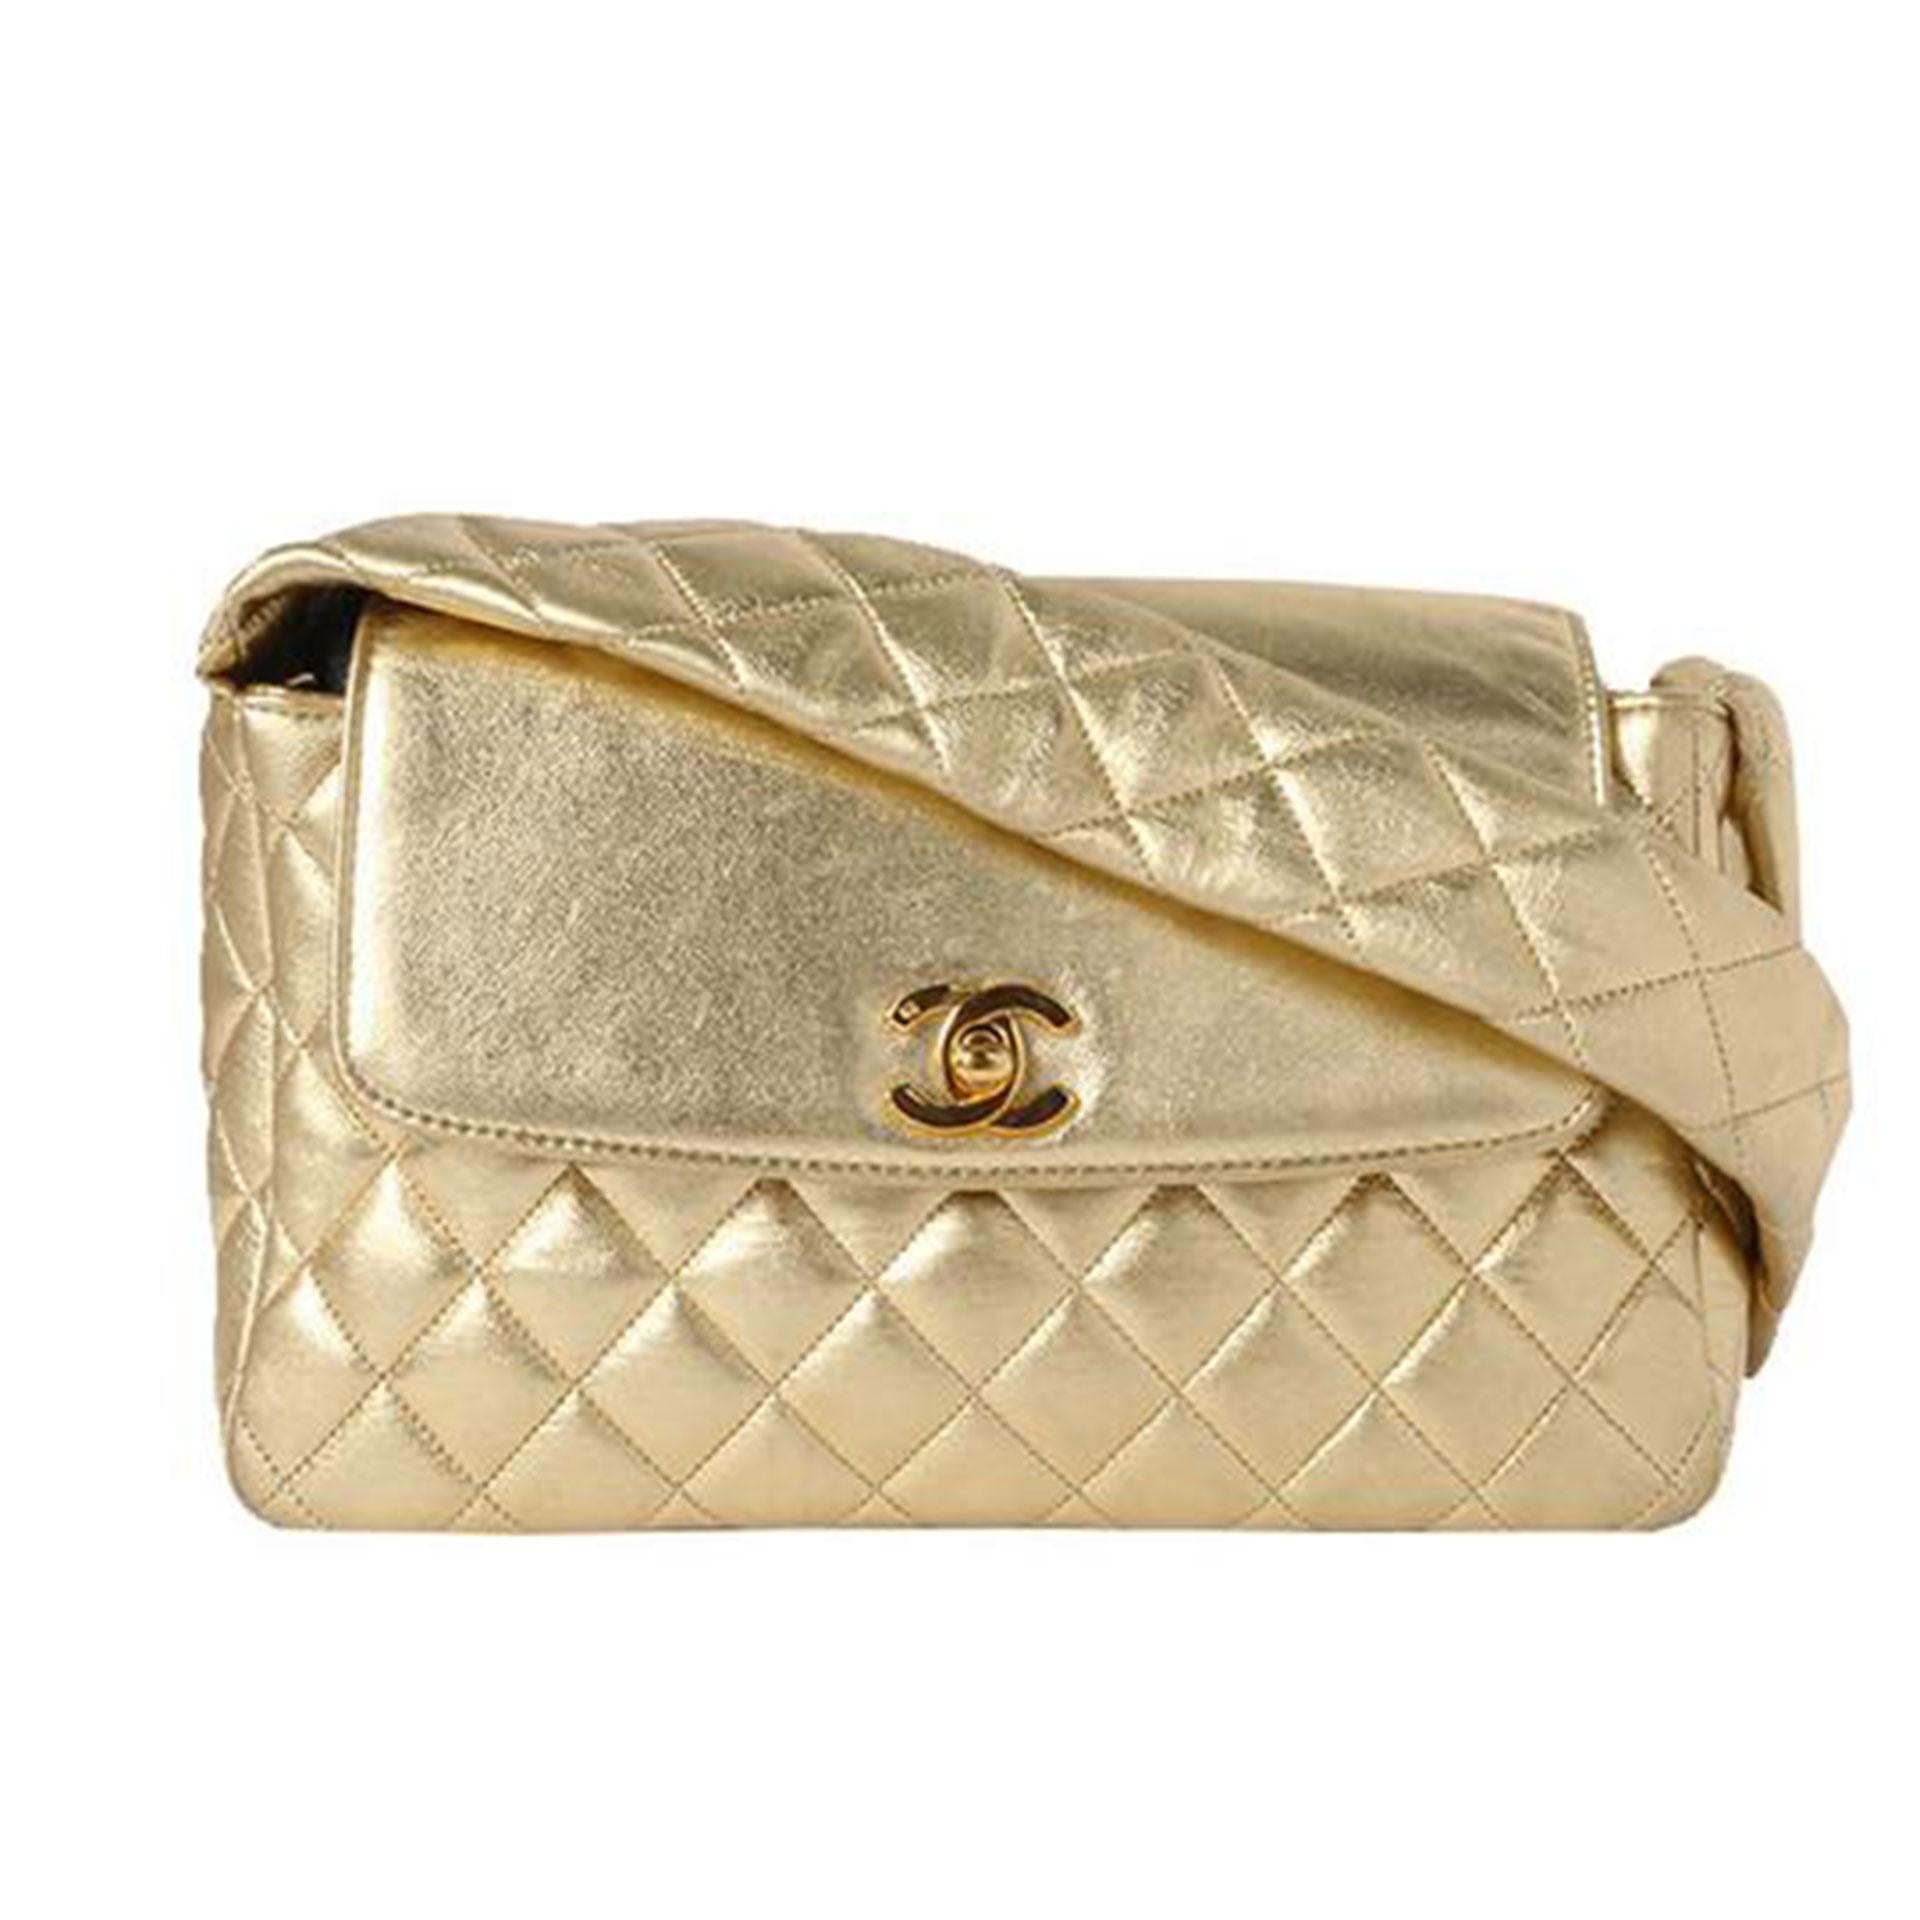 Chanel 1994 Top Handle Rare Limited Edition Quilted Flap Gold Metallic Bag In Good Condition For Sale In Miami, FL